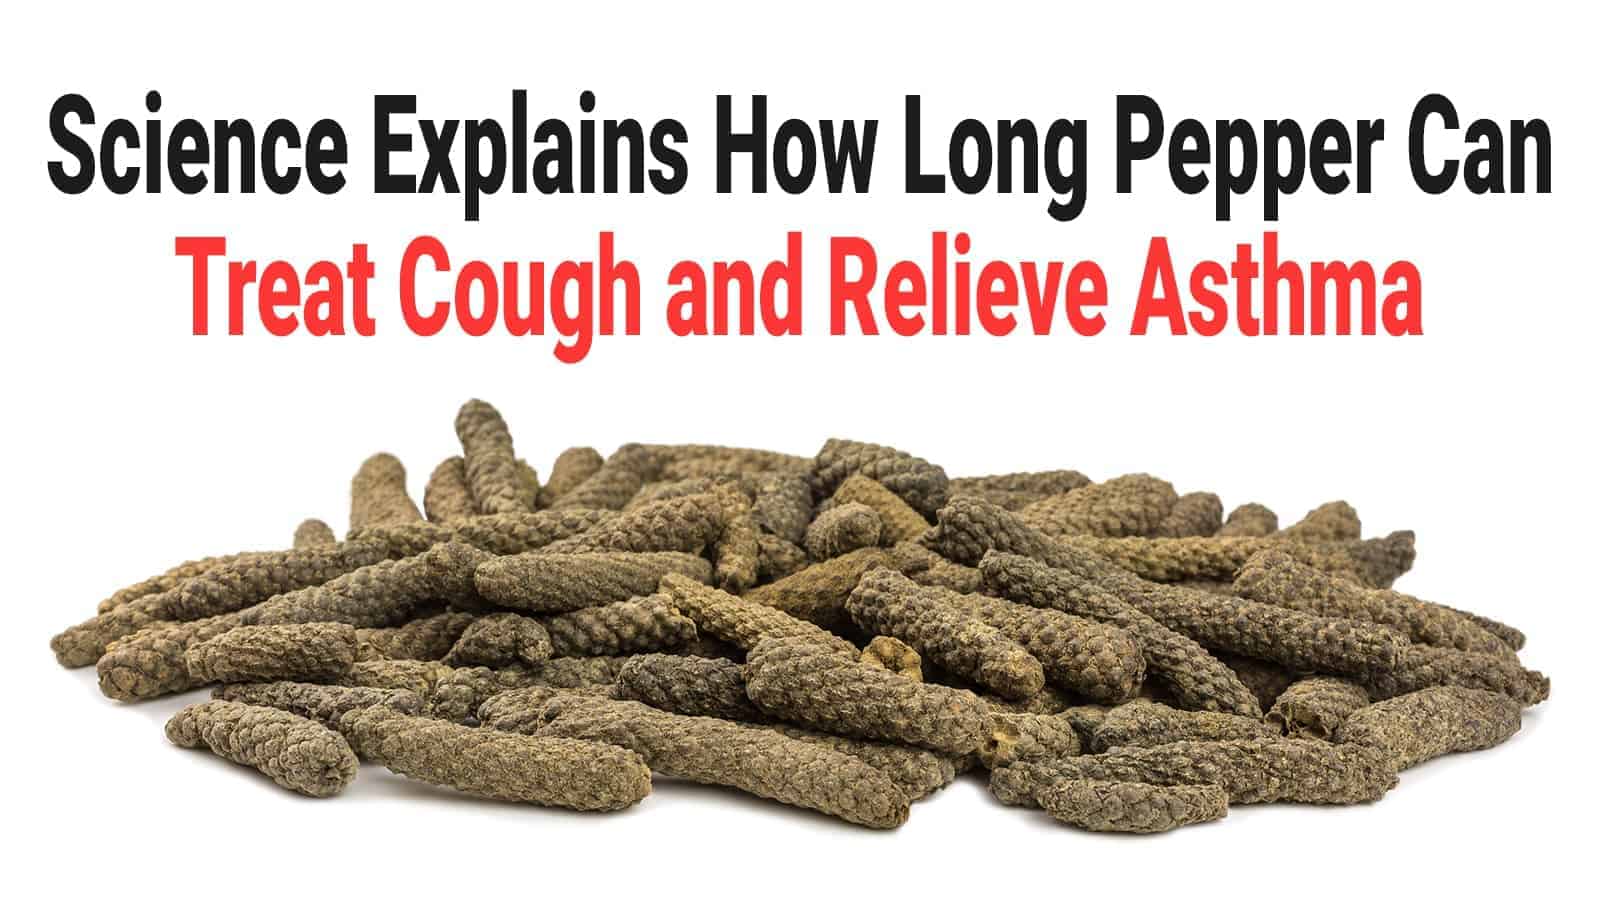 Science Explains How Long Pepper Can Treat Cough and Relieve Asthma